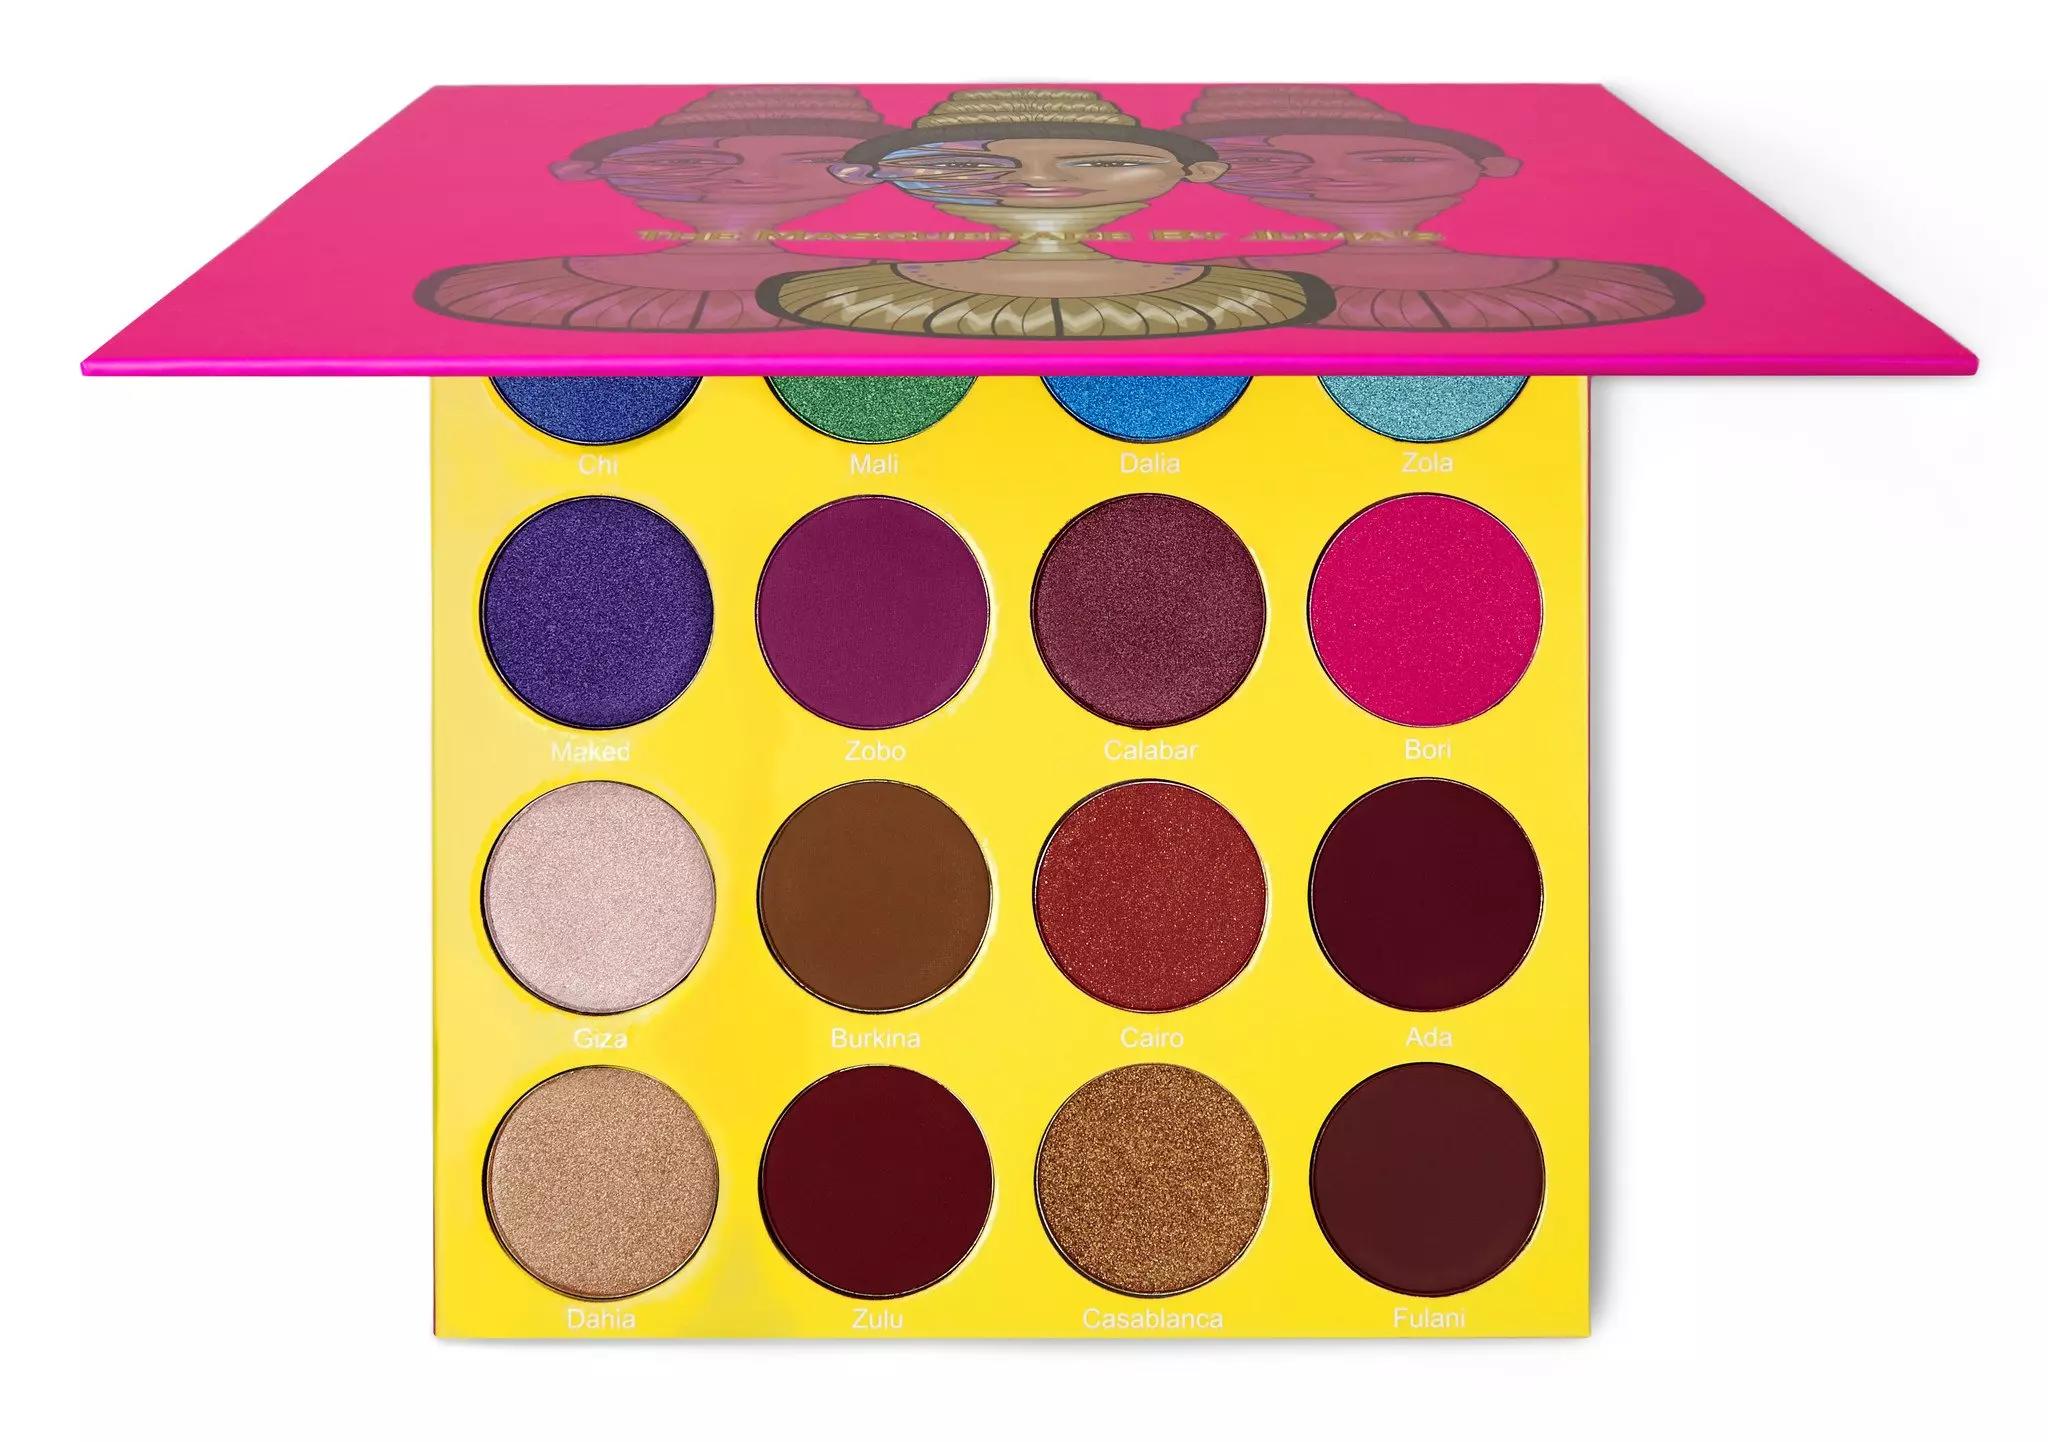 2nd Chance Juvia's Eyeshadow Palette The Masquerade Large